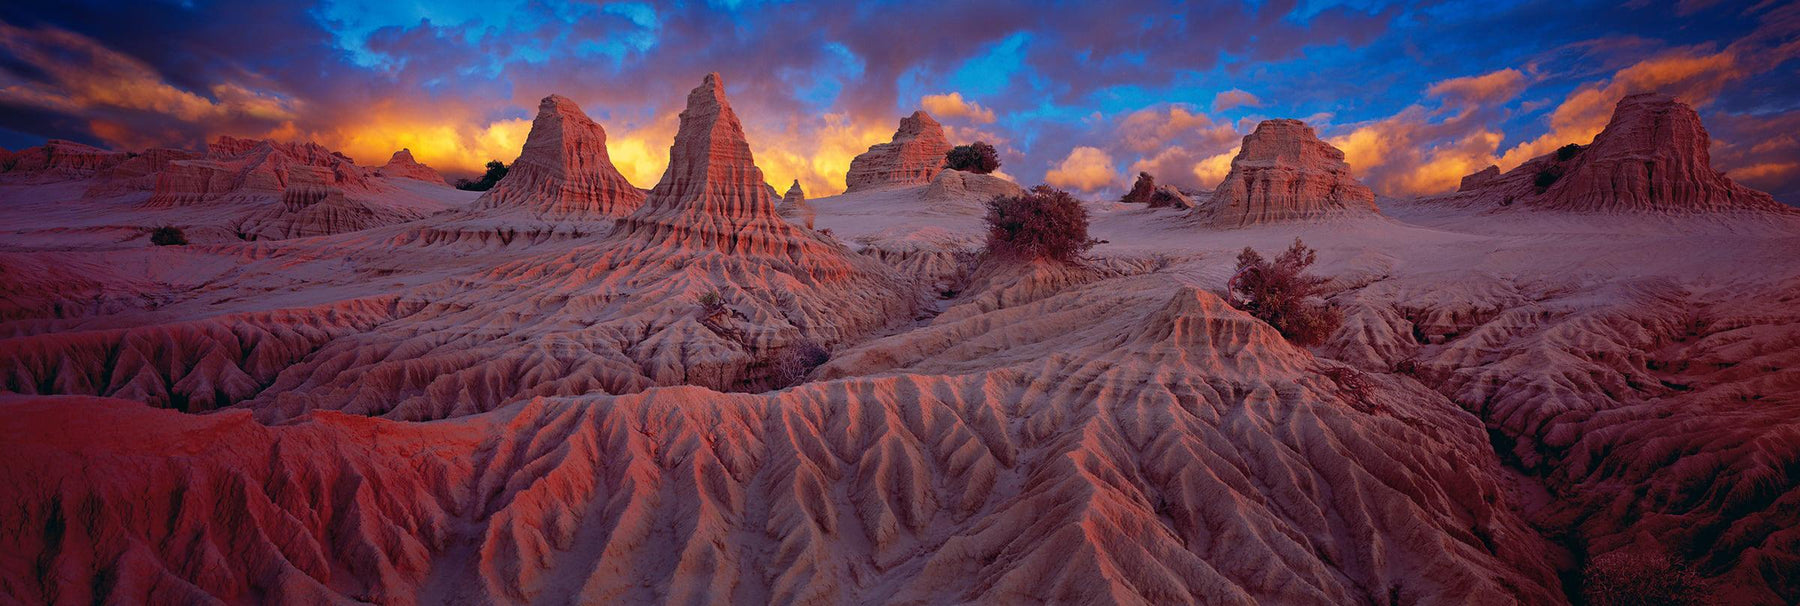 Sculptured towers of dirt in the remote outback in Mungo National Park Australia at sunset